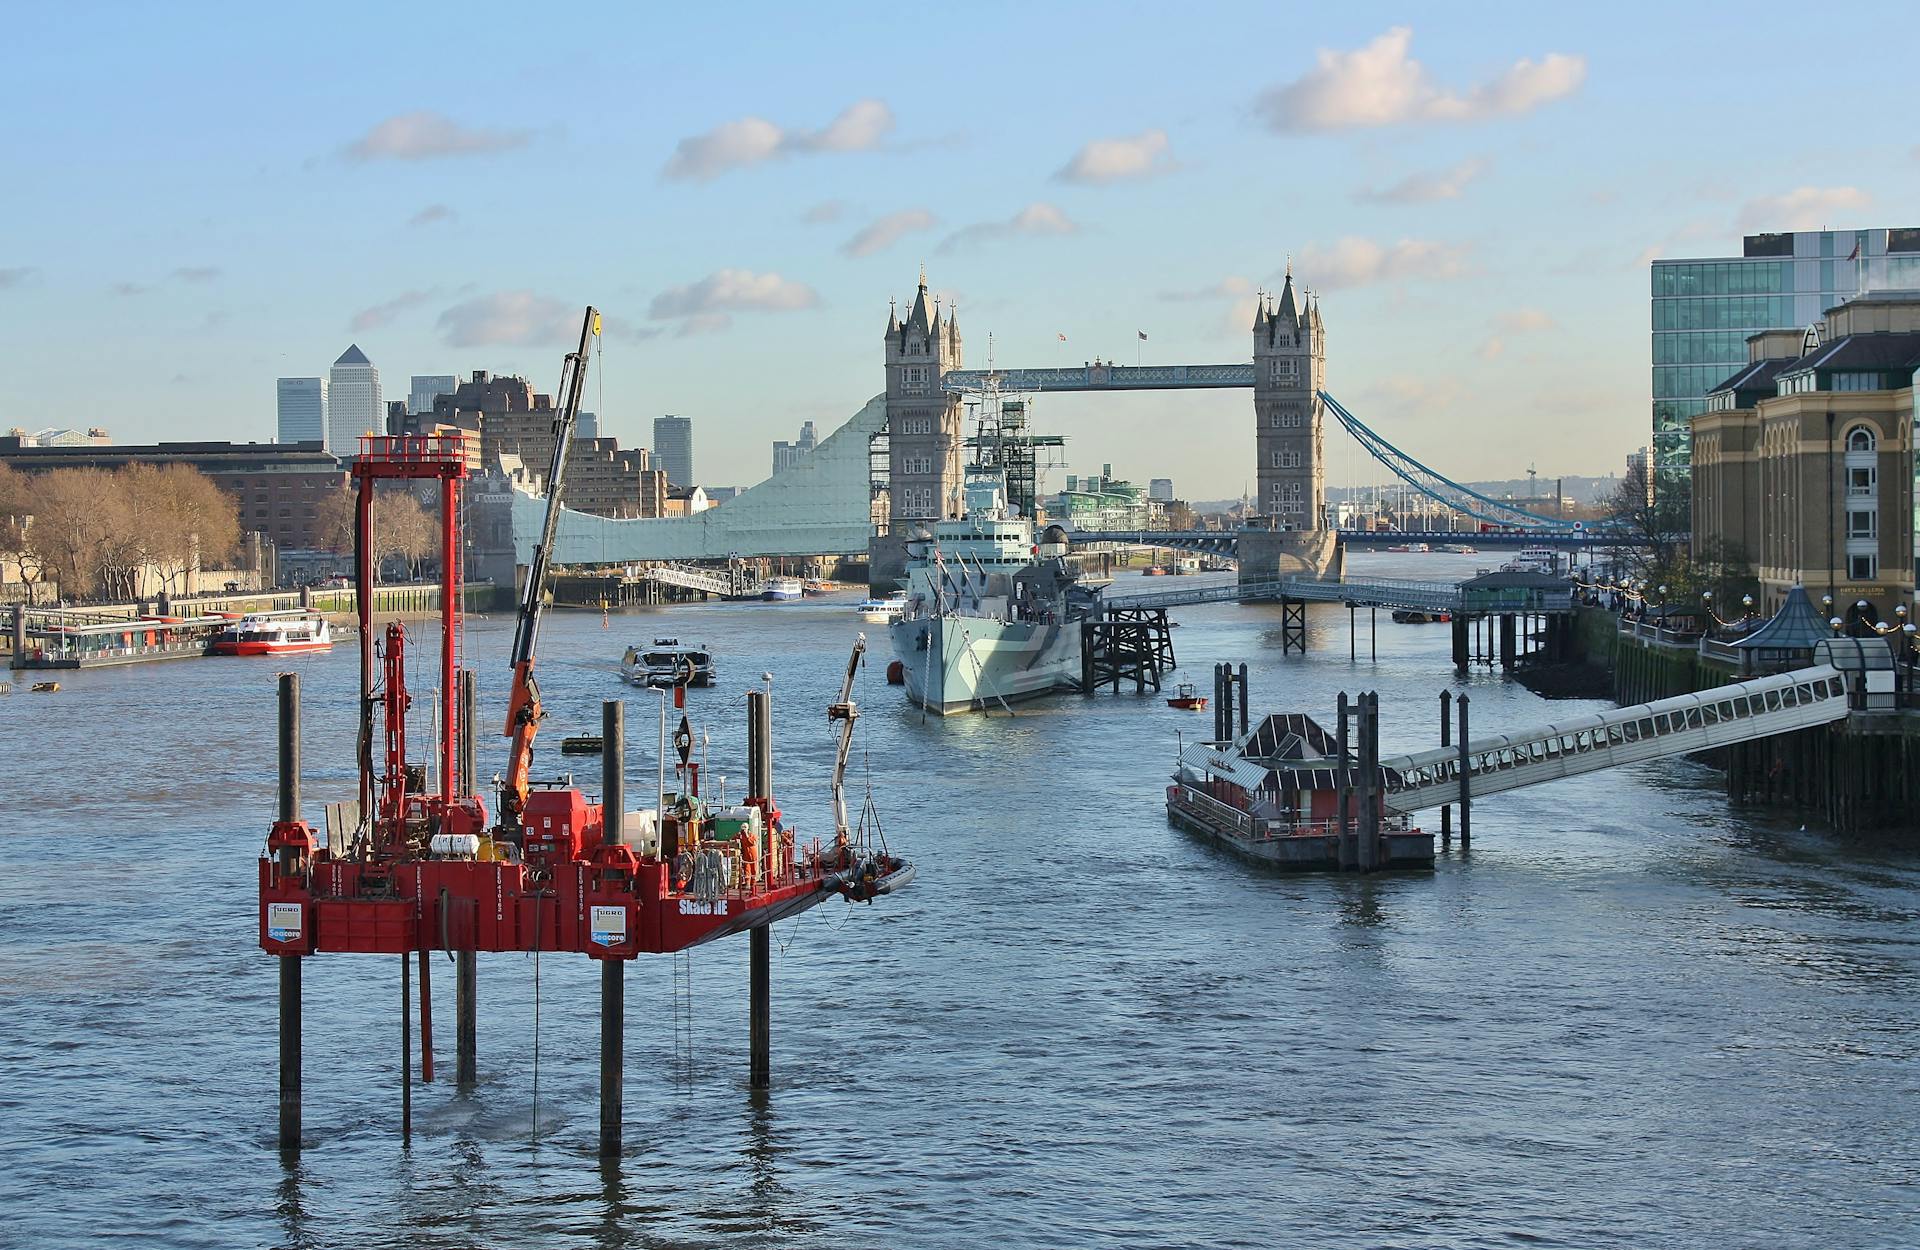 Fugro jack-up barge conducting geotechnical investigations along the River Thames in City of London near Tower Bridge. 

With the jack-up rig on the Thames, London, site investigations are being made to gather data on behalf of the Thames Tunnel Project